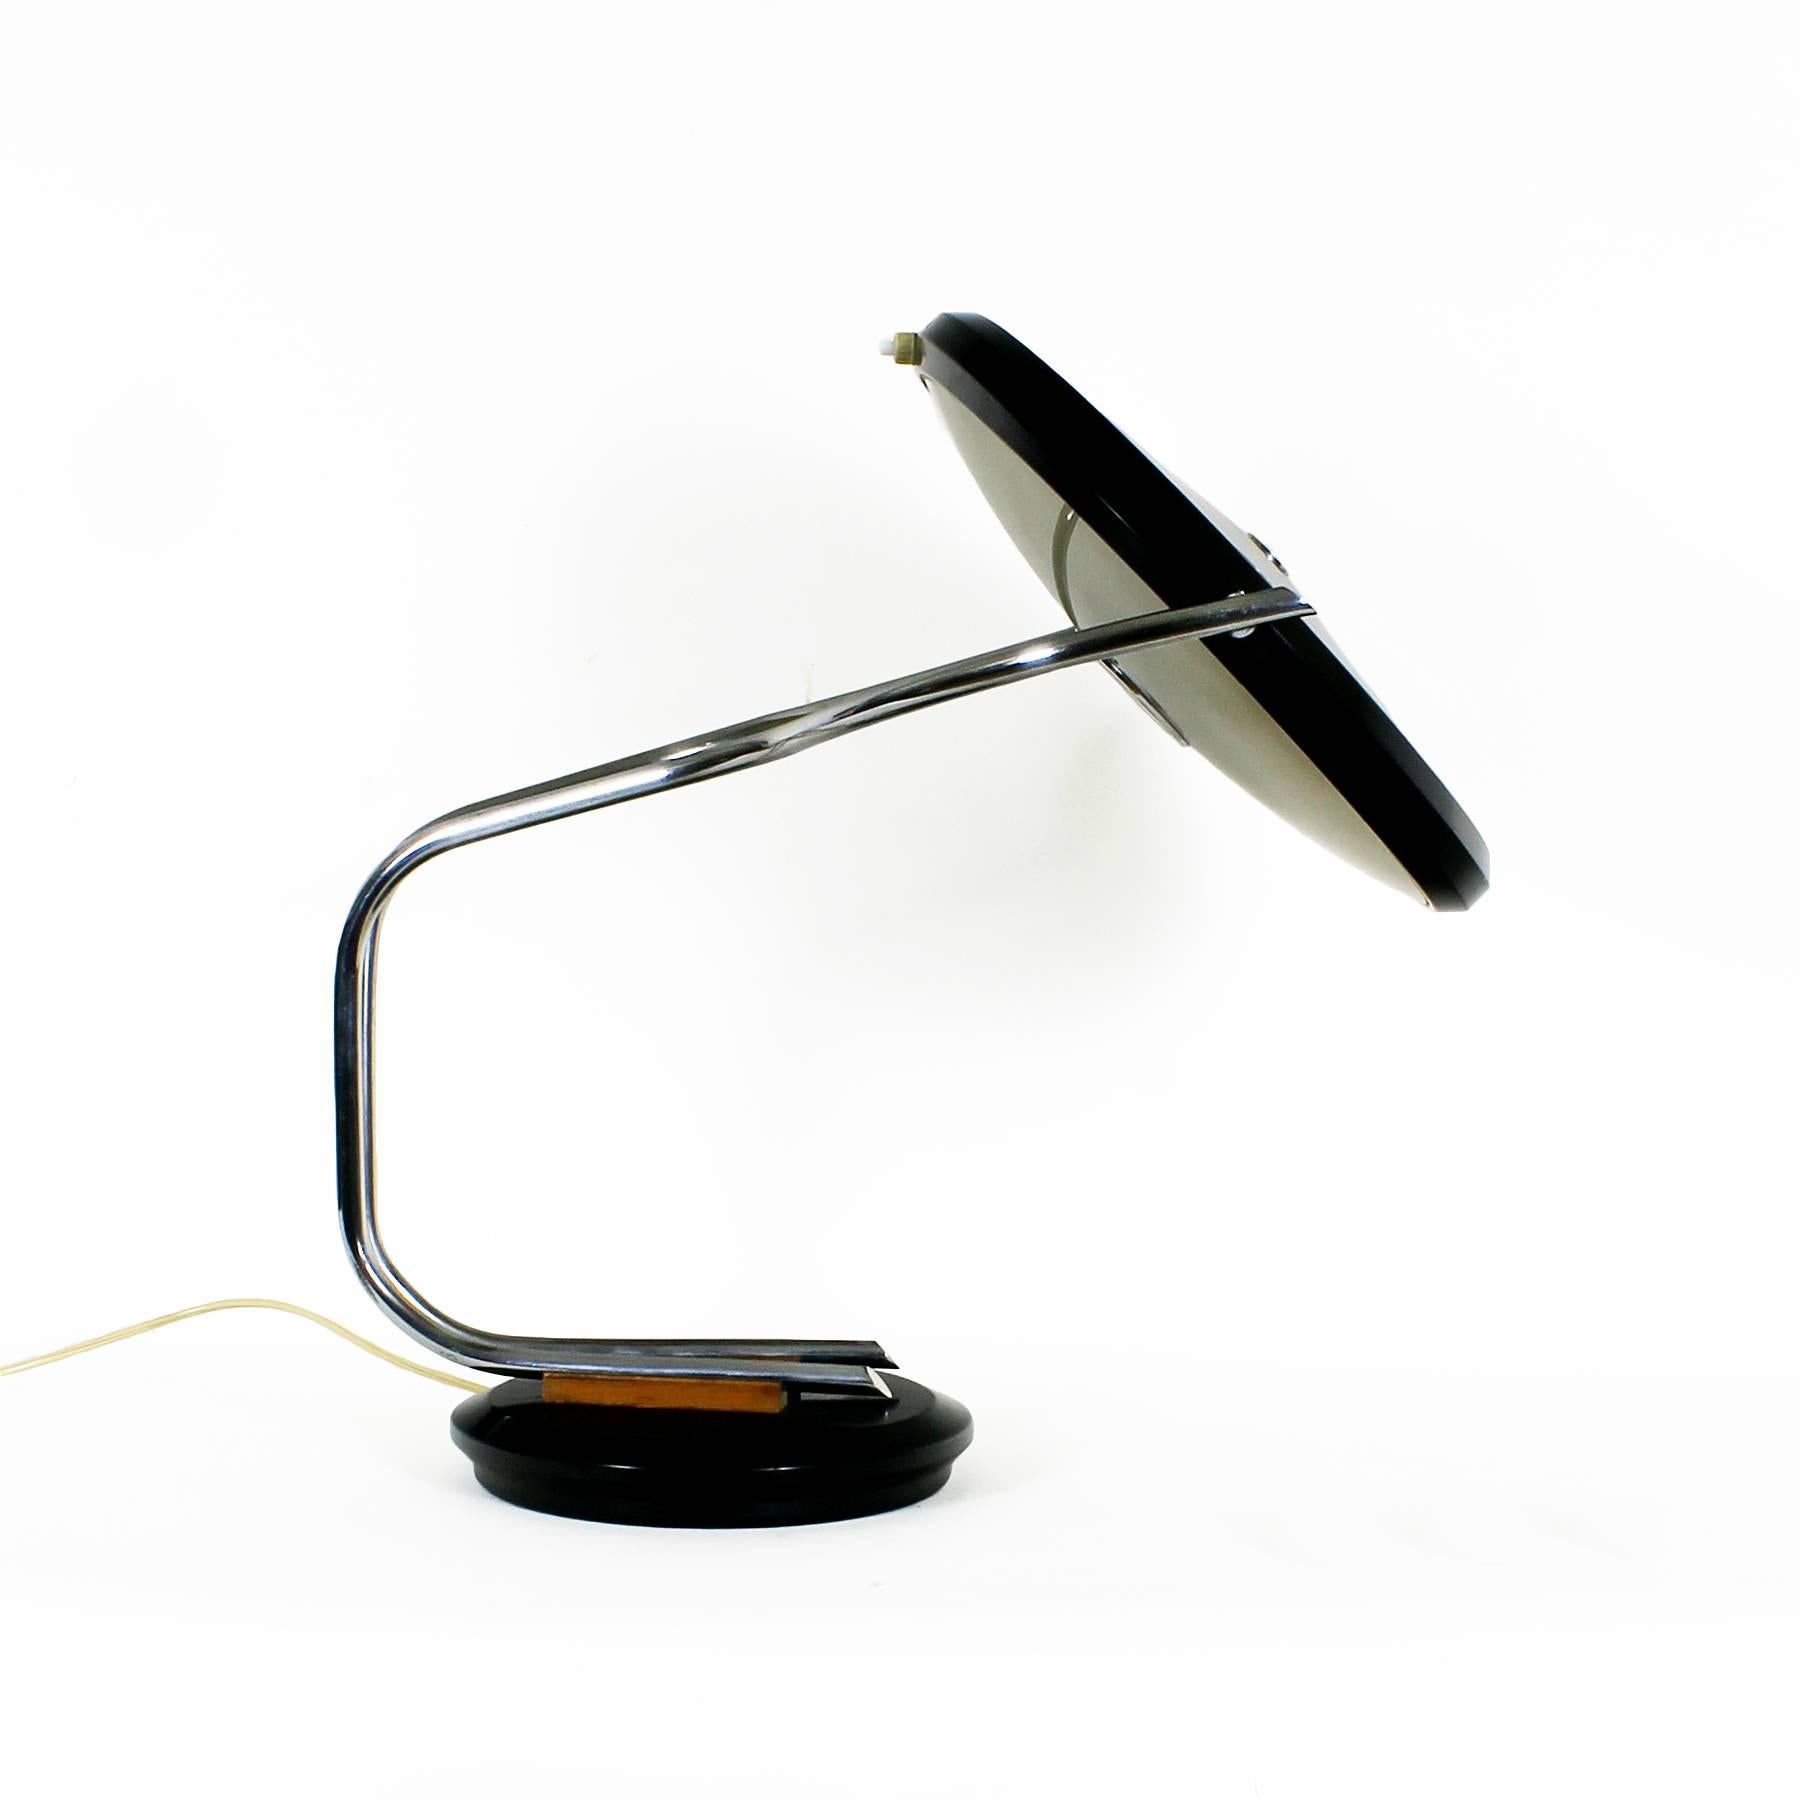 Rare desk lamp, revolving base and pivoting lampshade, chrome-plated metal, black lacquered sheet metal, teak wood and sanded glass.
Maker: Fase

Spain, circa 1960.